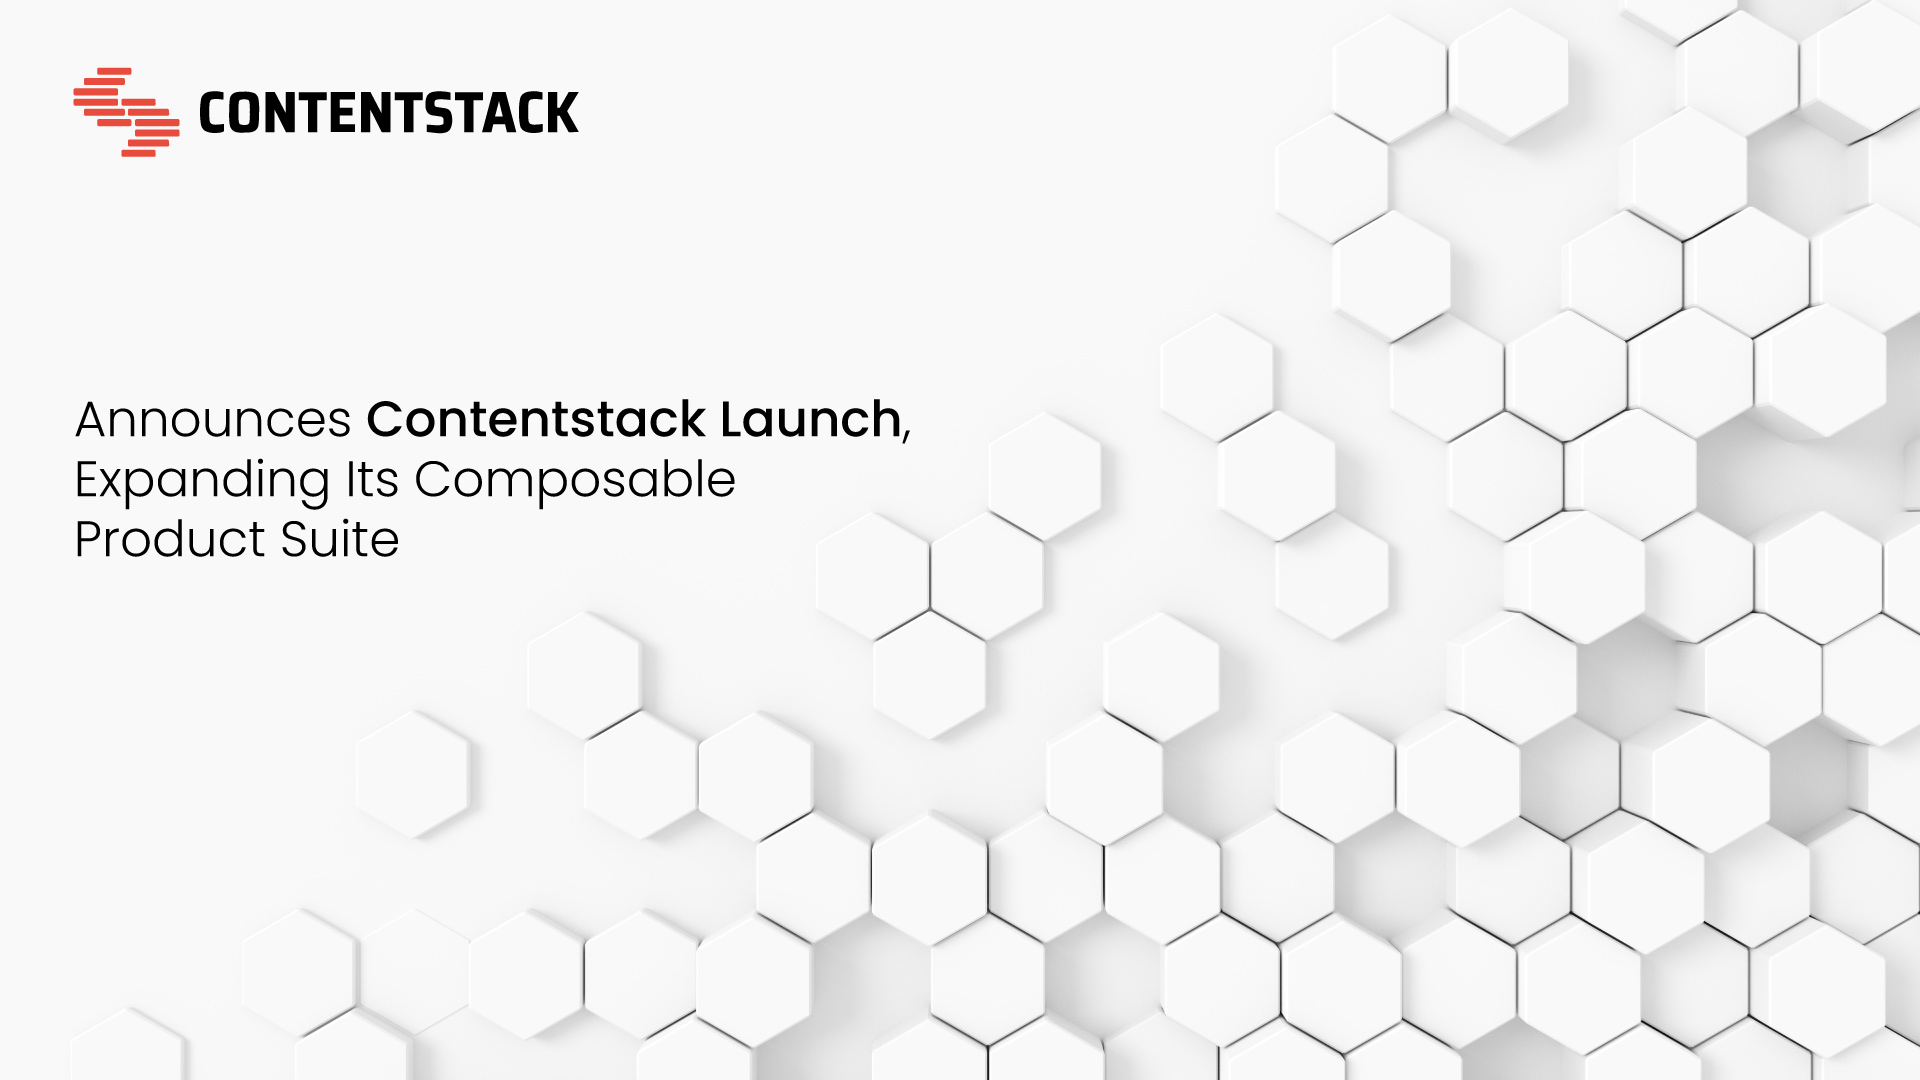 Contentstack Expands Product Suite, Enters Front-End Hosting Market With New Fully-Integrated Offering: Contentstack Launch